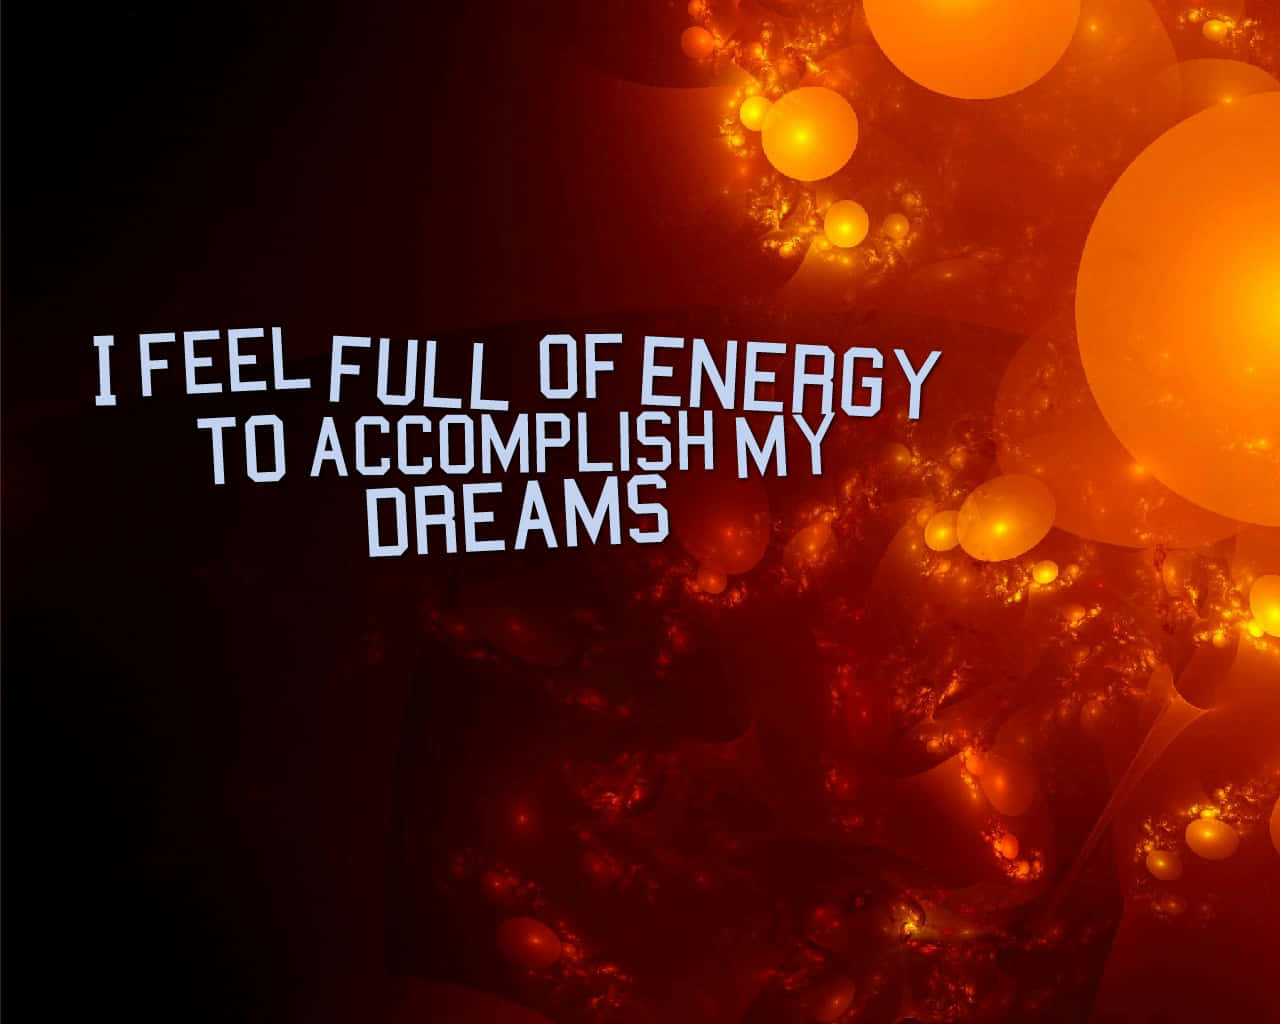 Inspirational Affirmation on a Colorful Background